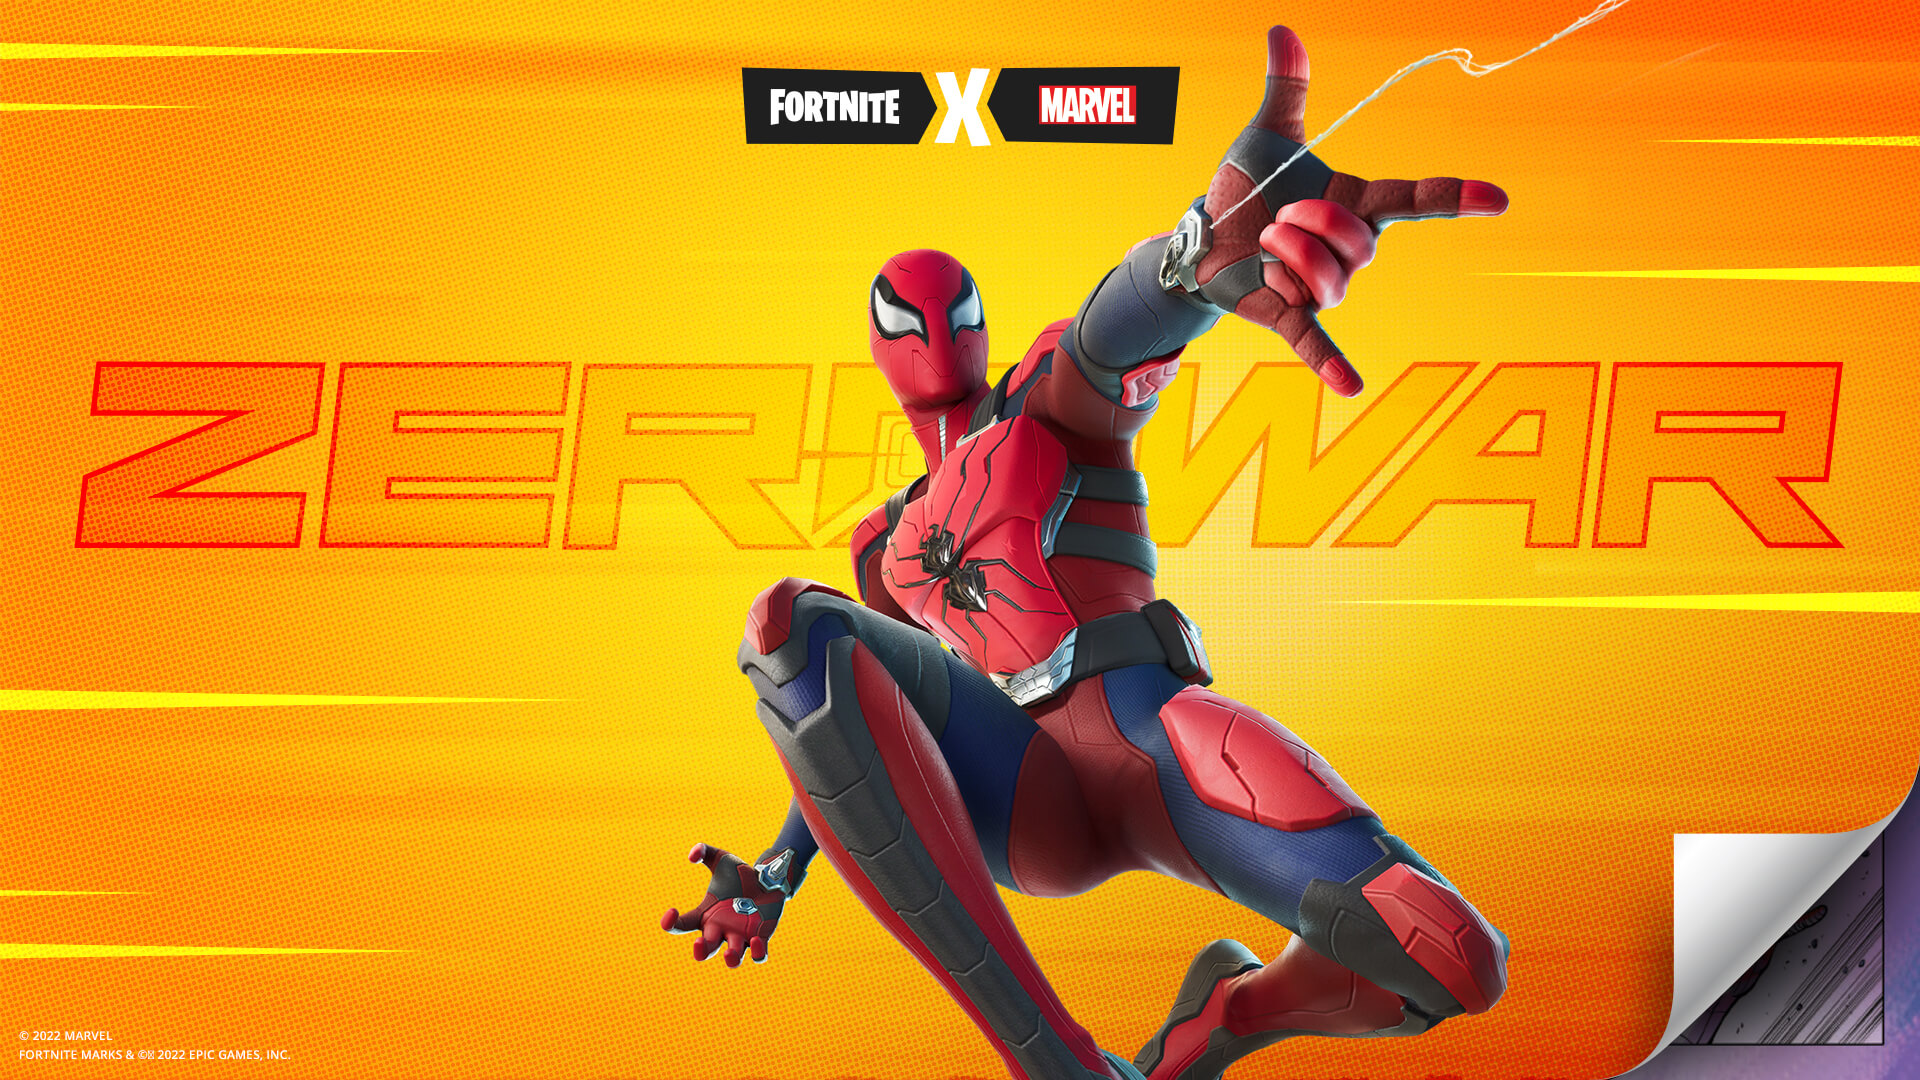 How to get Spider-Man Zero in Fortnite